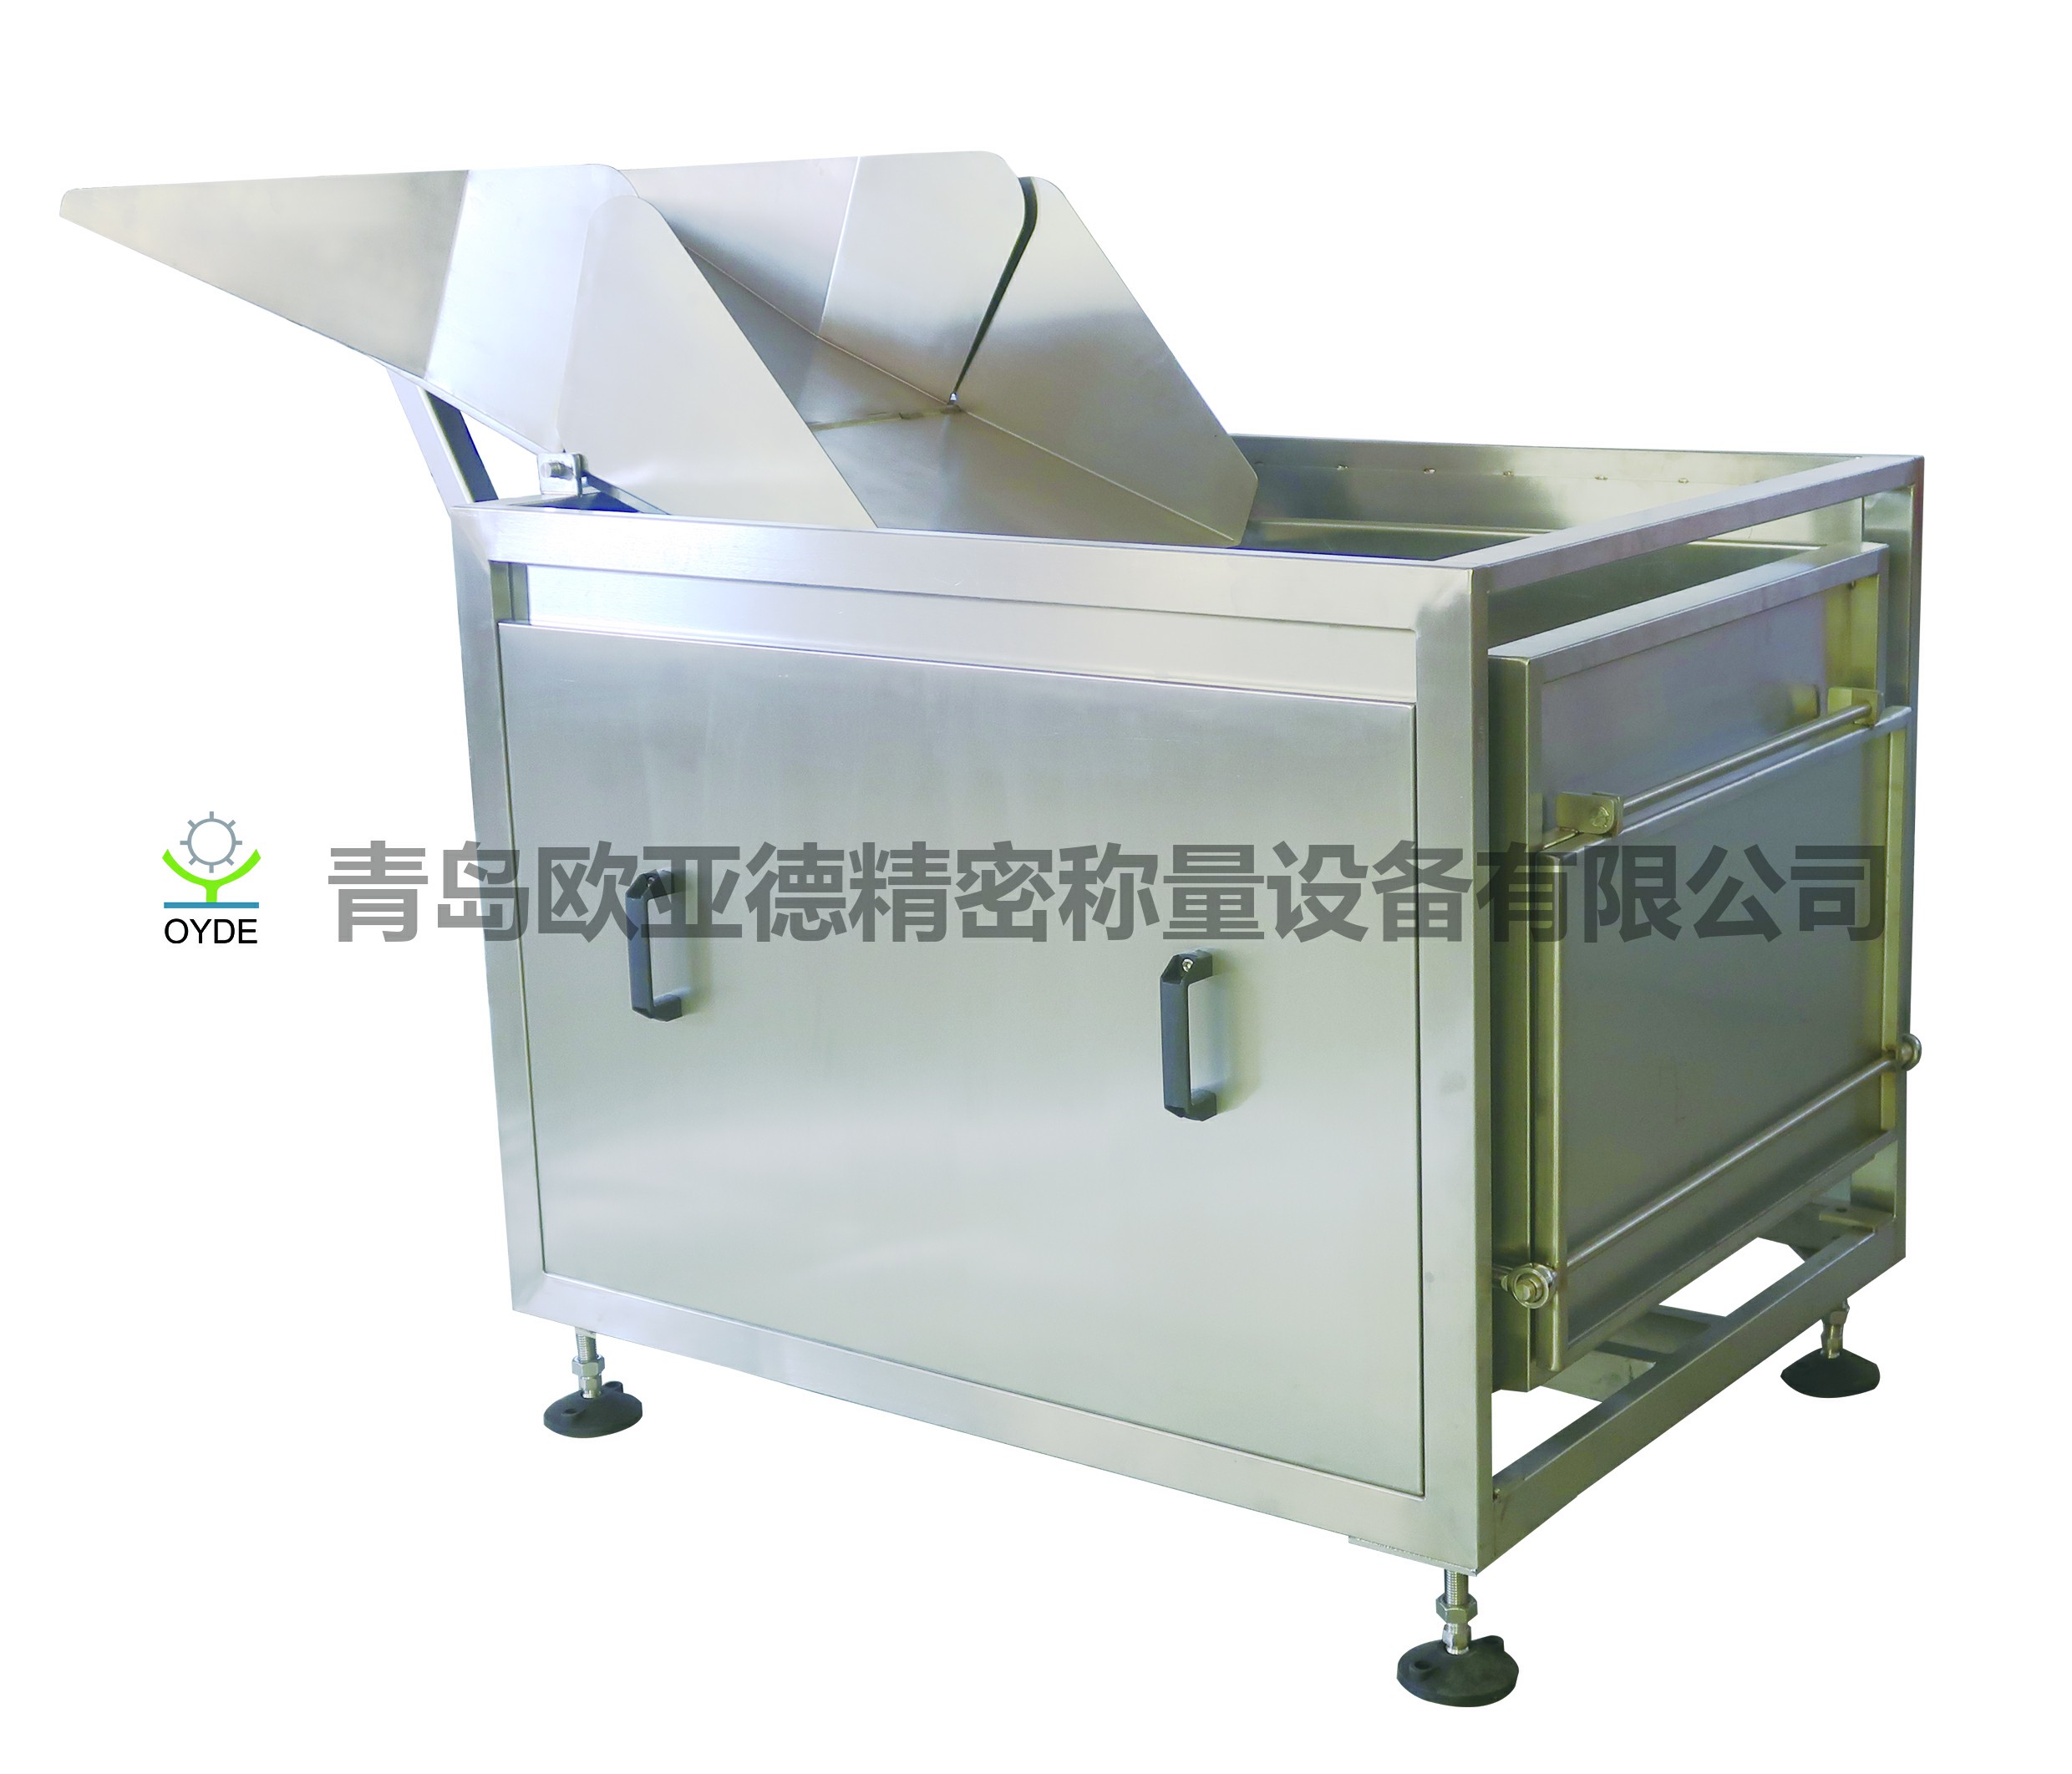 Automatic self-unloading weighing scale